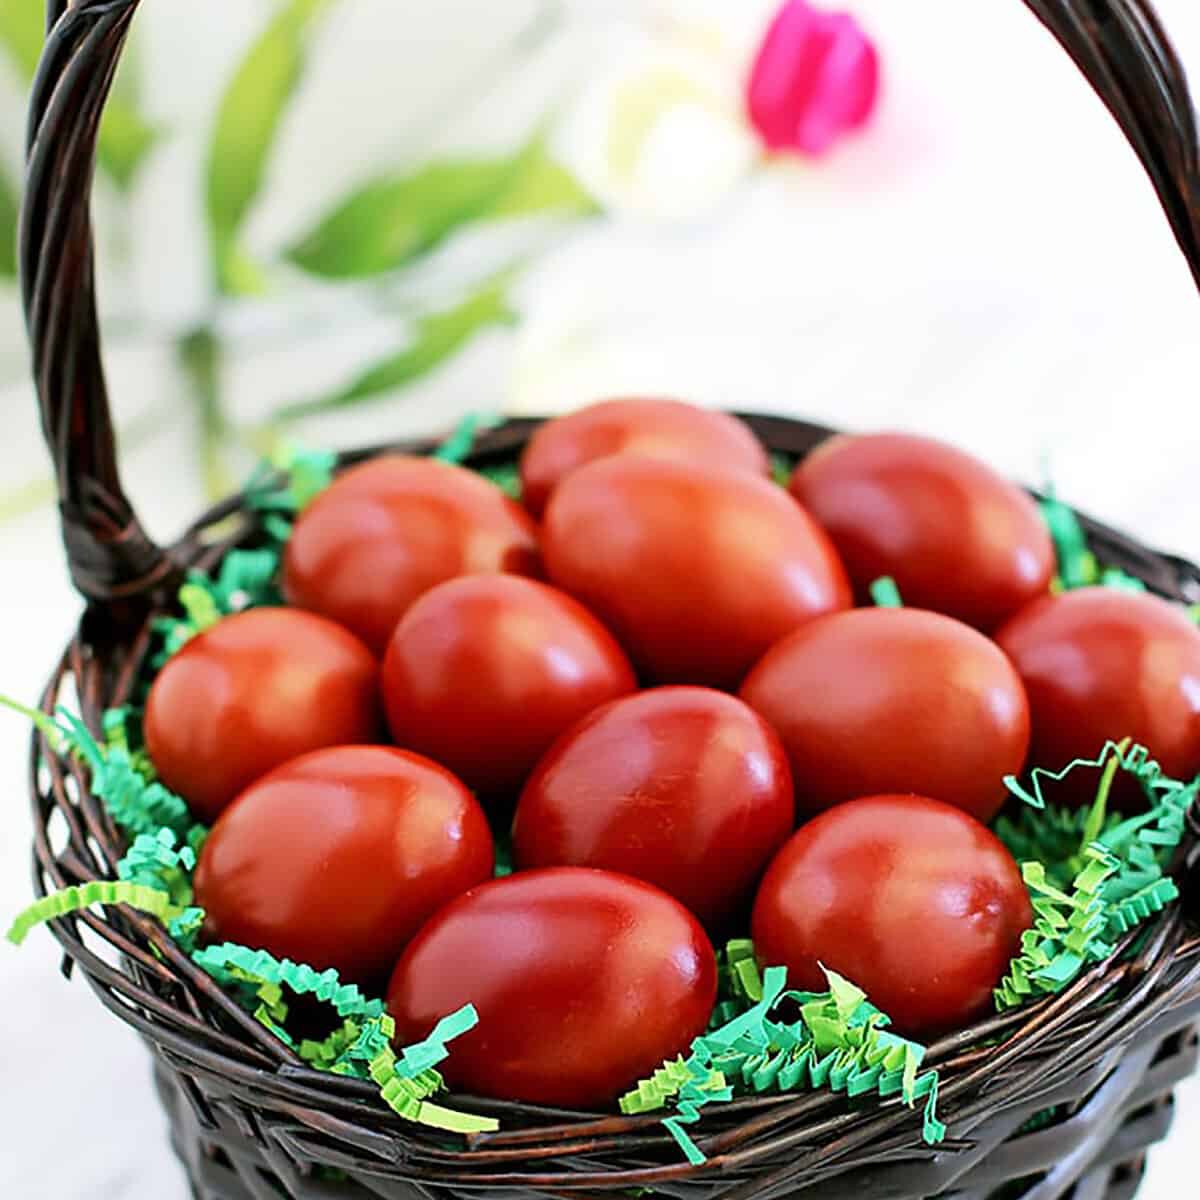 There’s no need to buy expensive store-bought dyeing kits to make these beautiful, dyed Easter eggs. In fact, you don’t even need to use liquid food coloring. All you need is some vegetable scraps to make the prettiest Naturally Dyed Easter eggs you’ve ever seen.